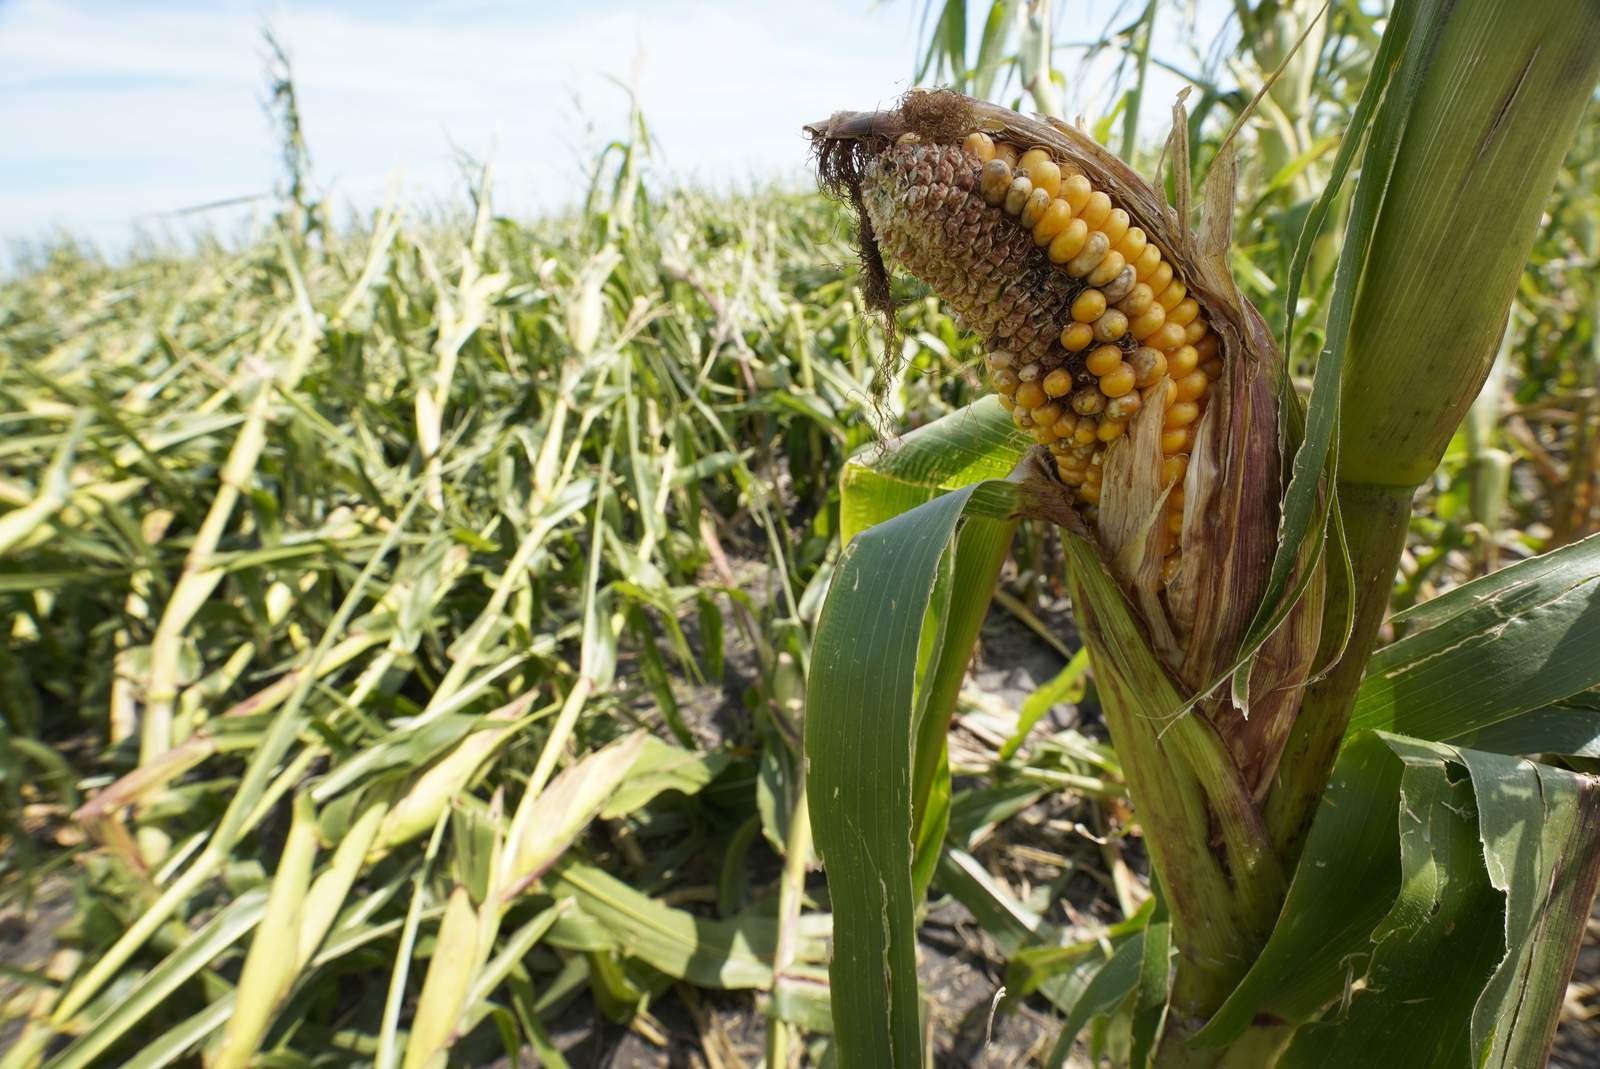 Report: Iowa’s derecho crop losses increase by more than 50%